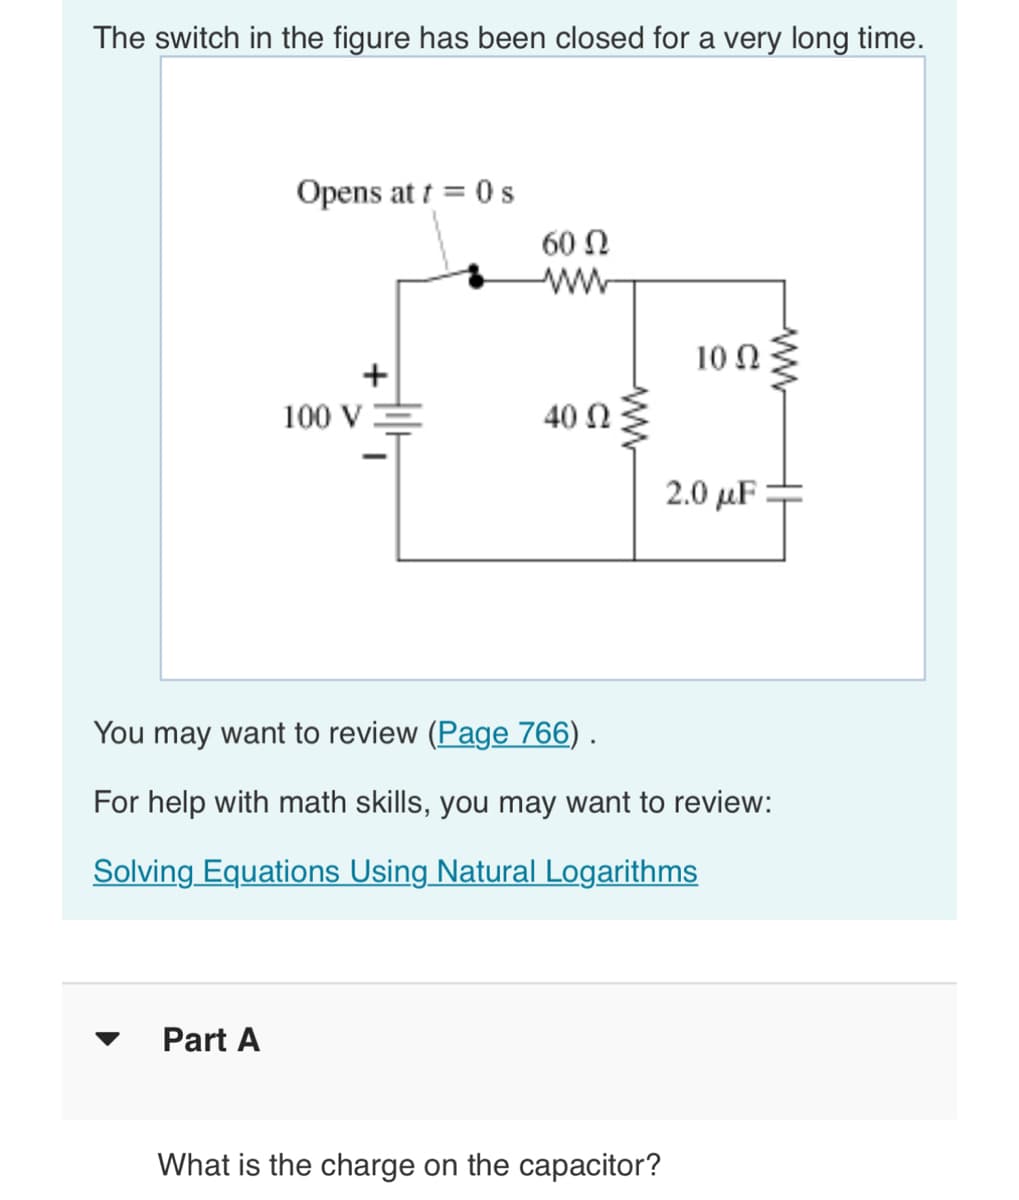 The switch in the figure has been closed for a very long time.
Opens at t = 0 s
Part A
100 V
60 Ω
www
40 Ω
ww
10 Q2
What is the charge on the capacitor?
2.0 μF
You may want to review (Page 766) .
For help with math skills, you may want to review:
Solving Equations Using Natural Logarithms
HI